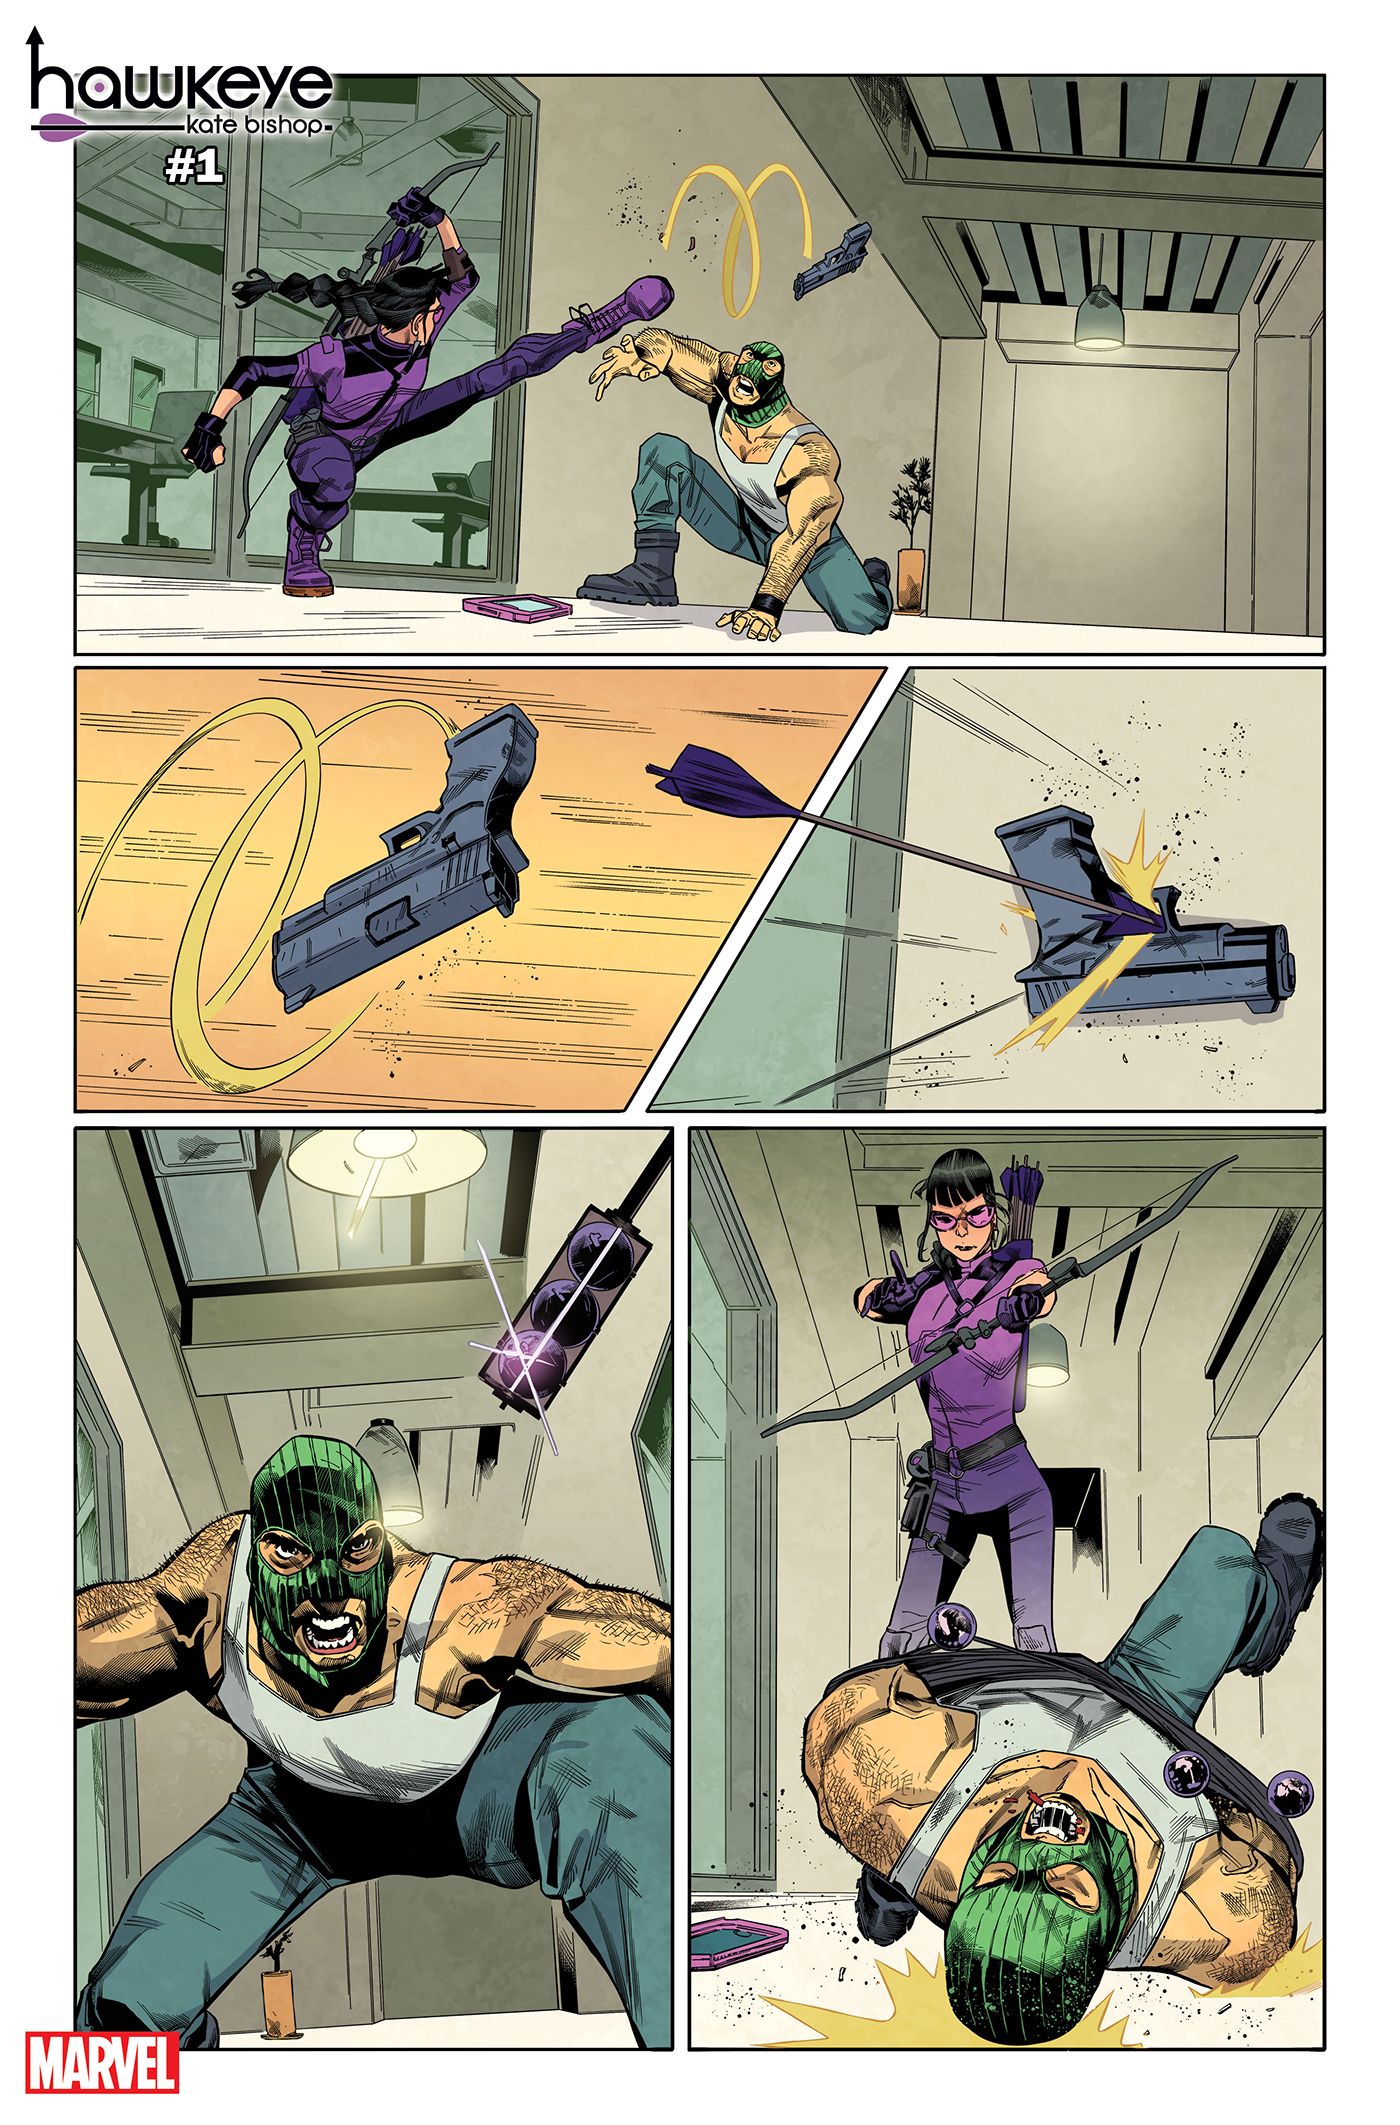 Kate Bishop ensnares the gunman with a bola arrow.